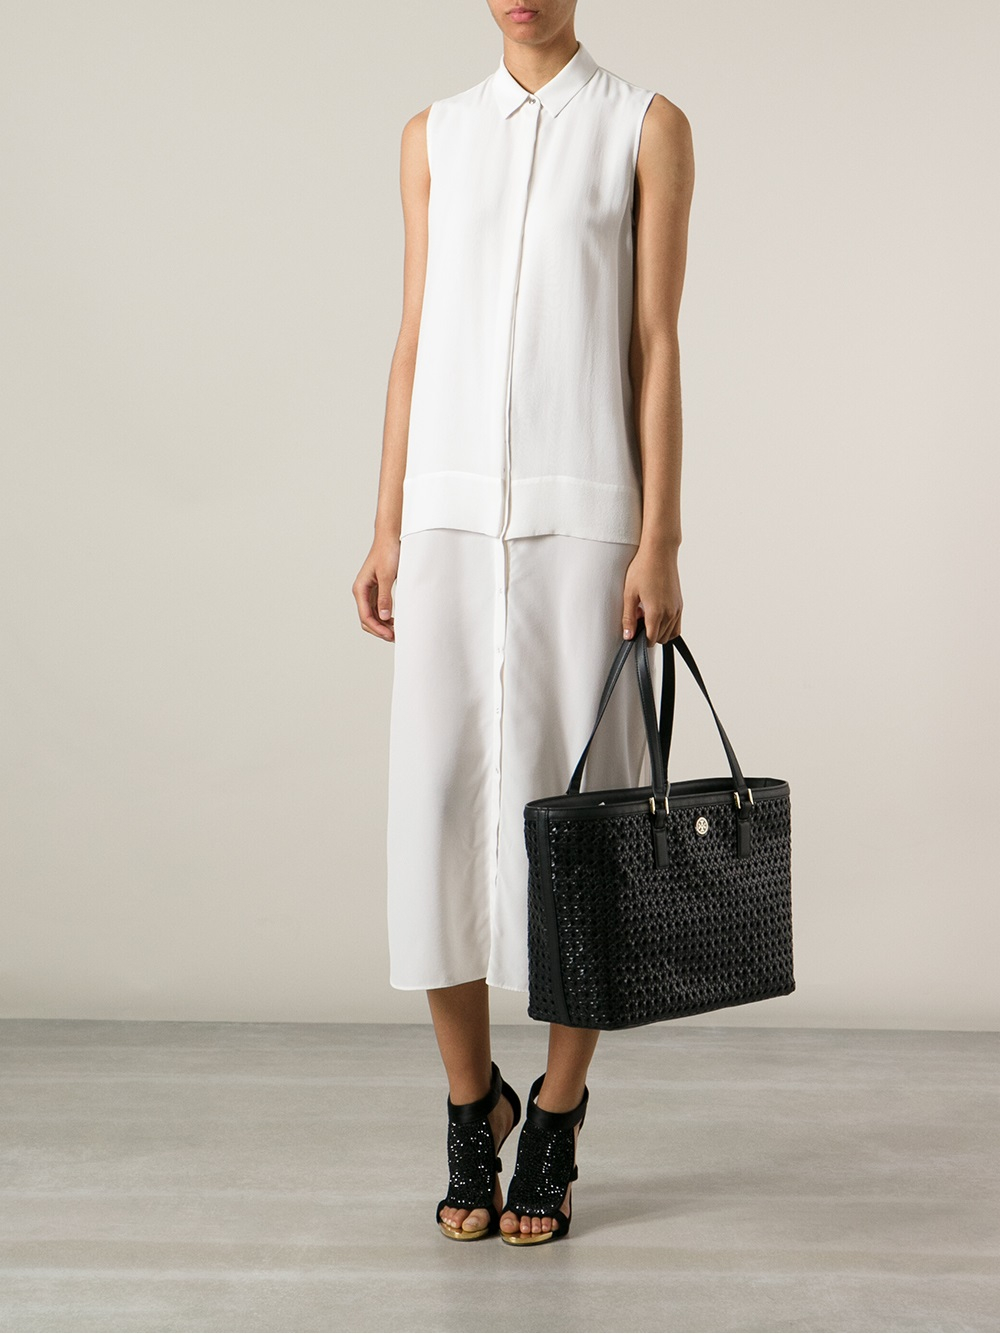 Tory Burch Woven Tote in Black